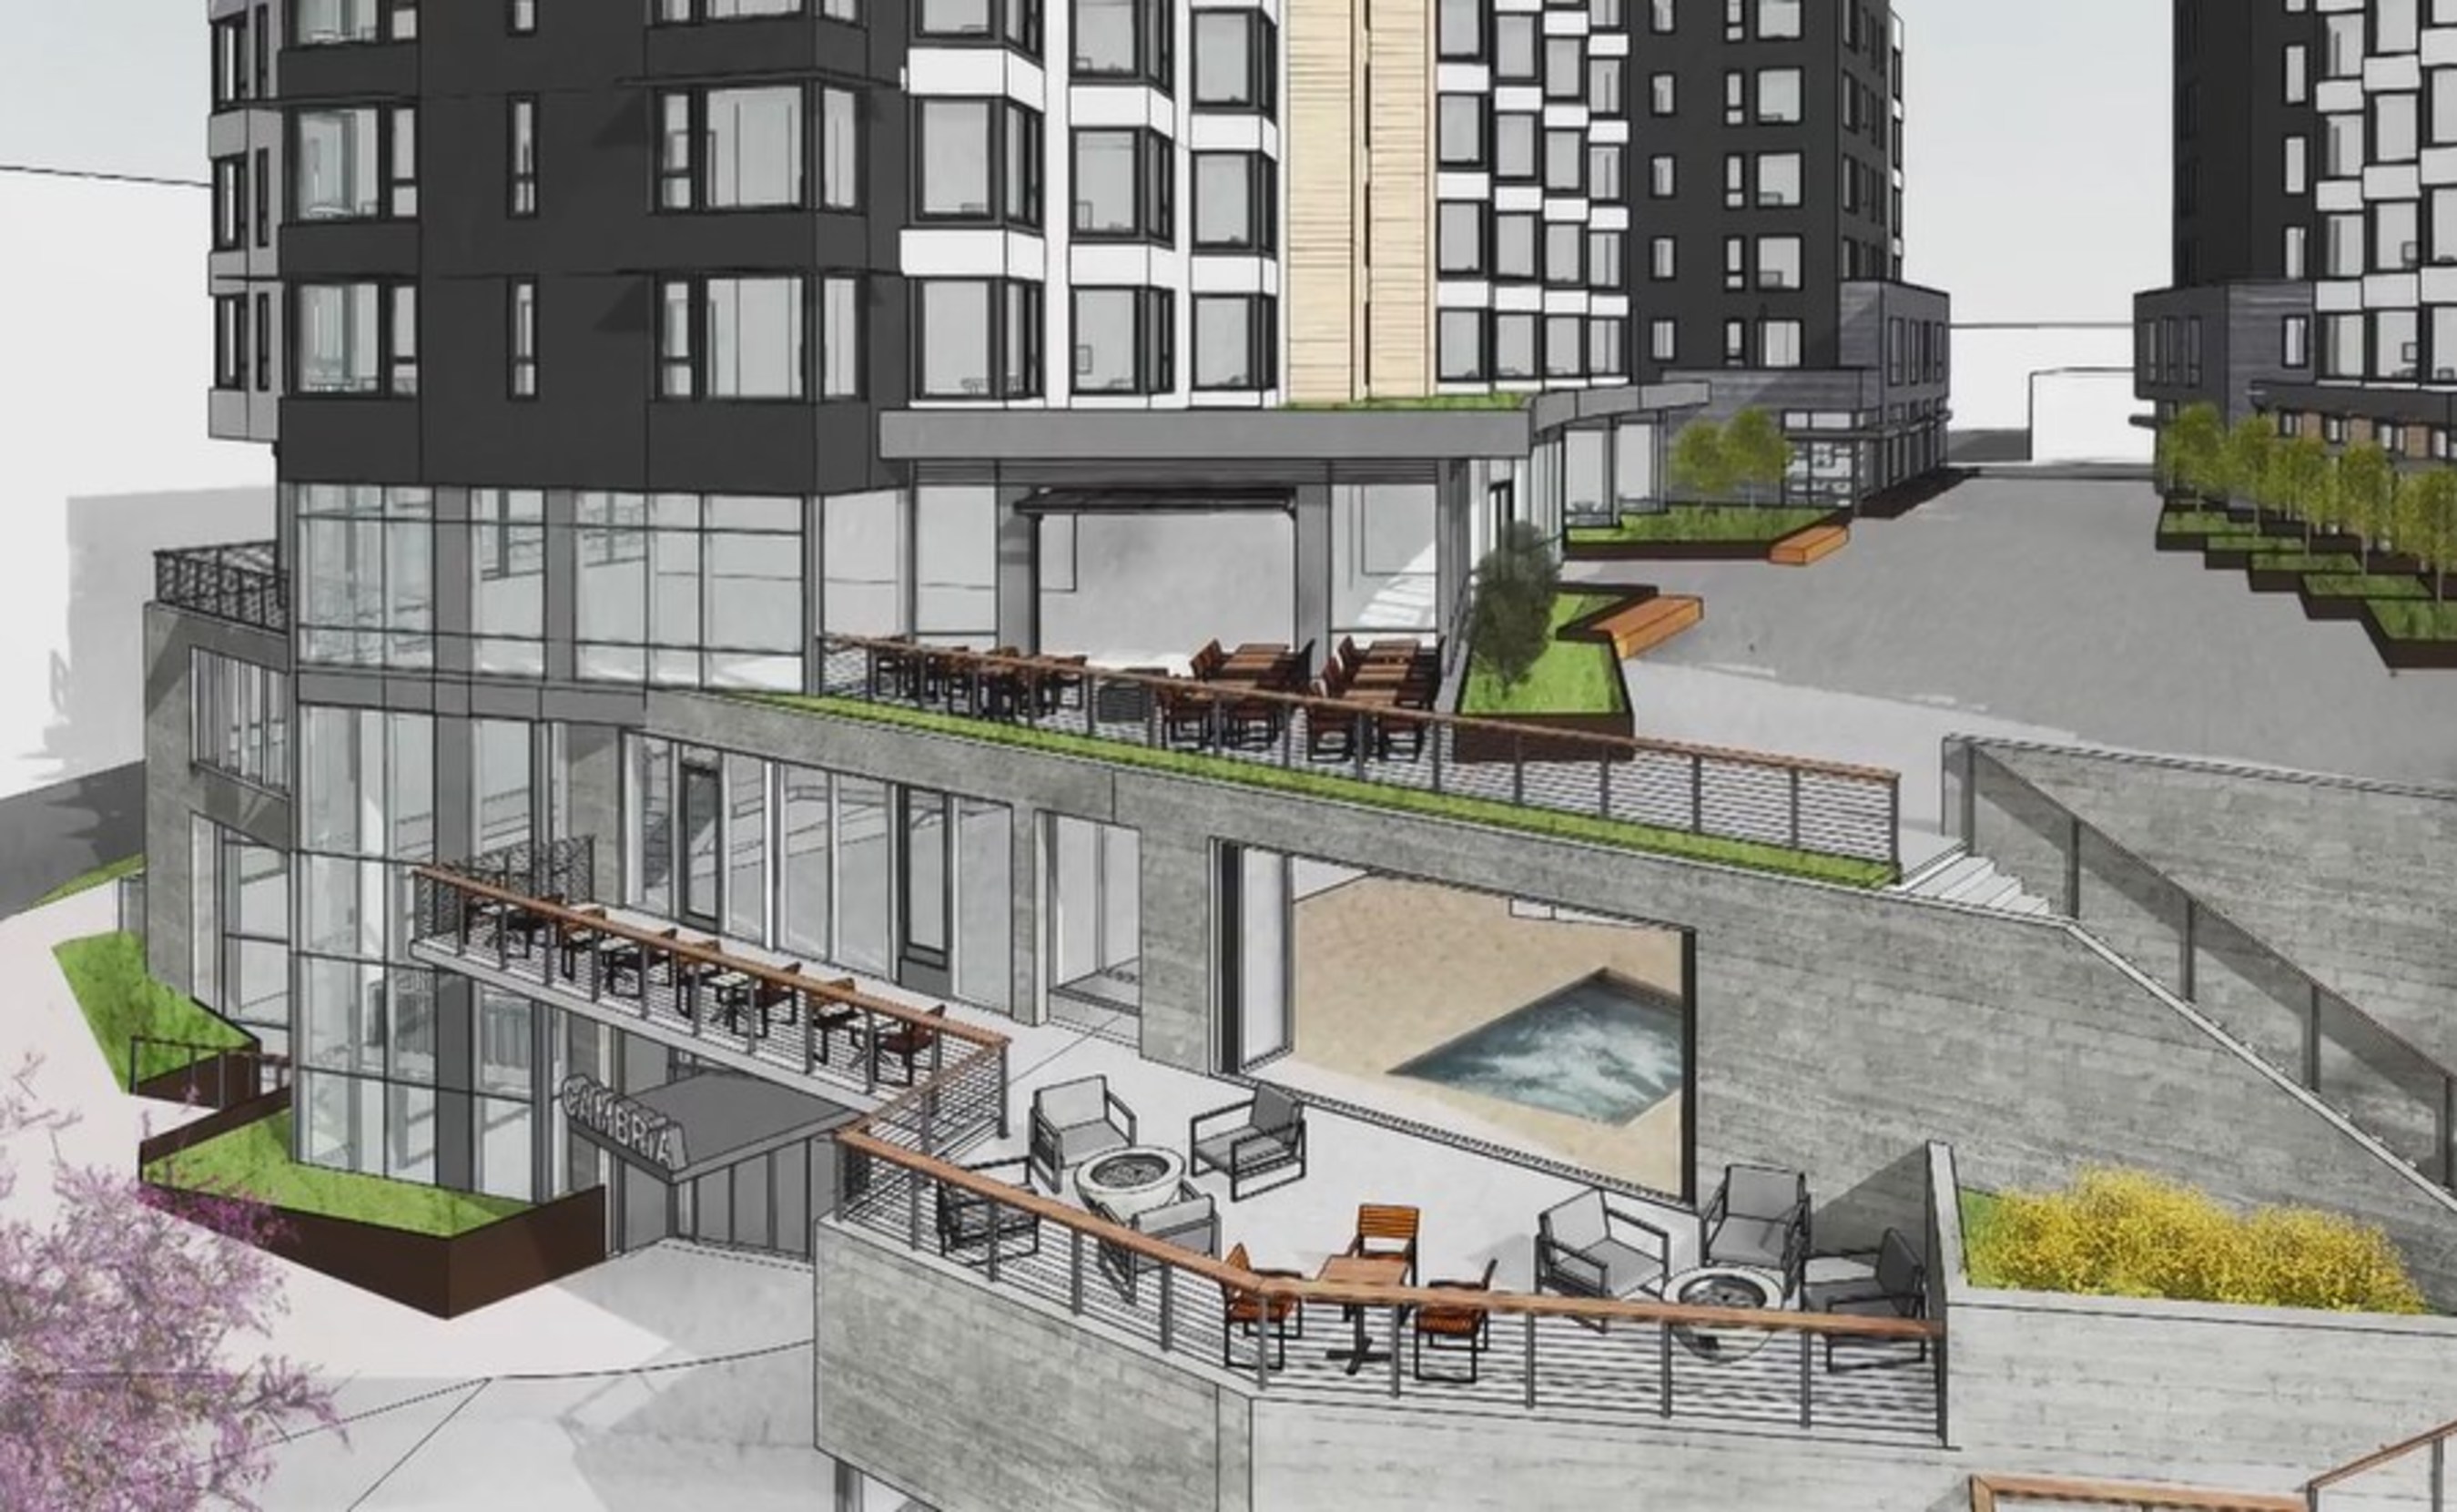 Slated to open in 2019 the Cambria Hotel Bremerton Island is being developed by the Sound West Group